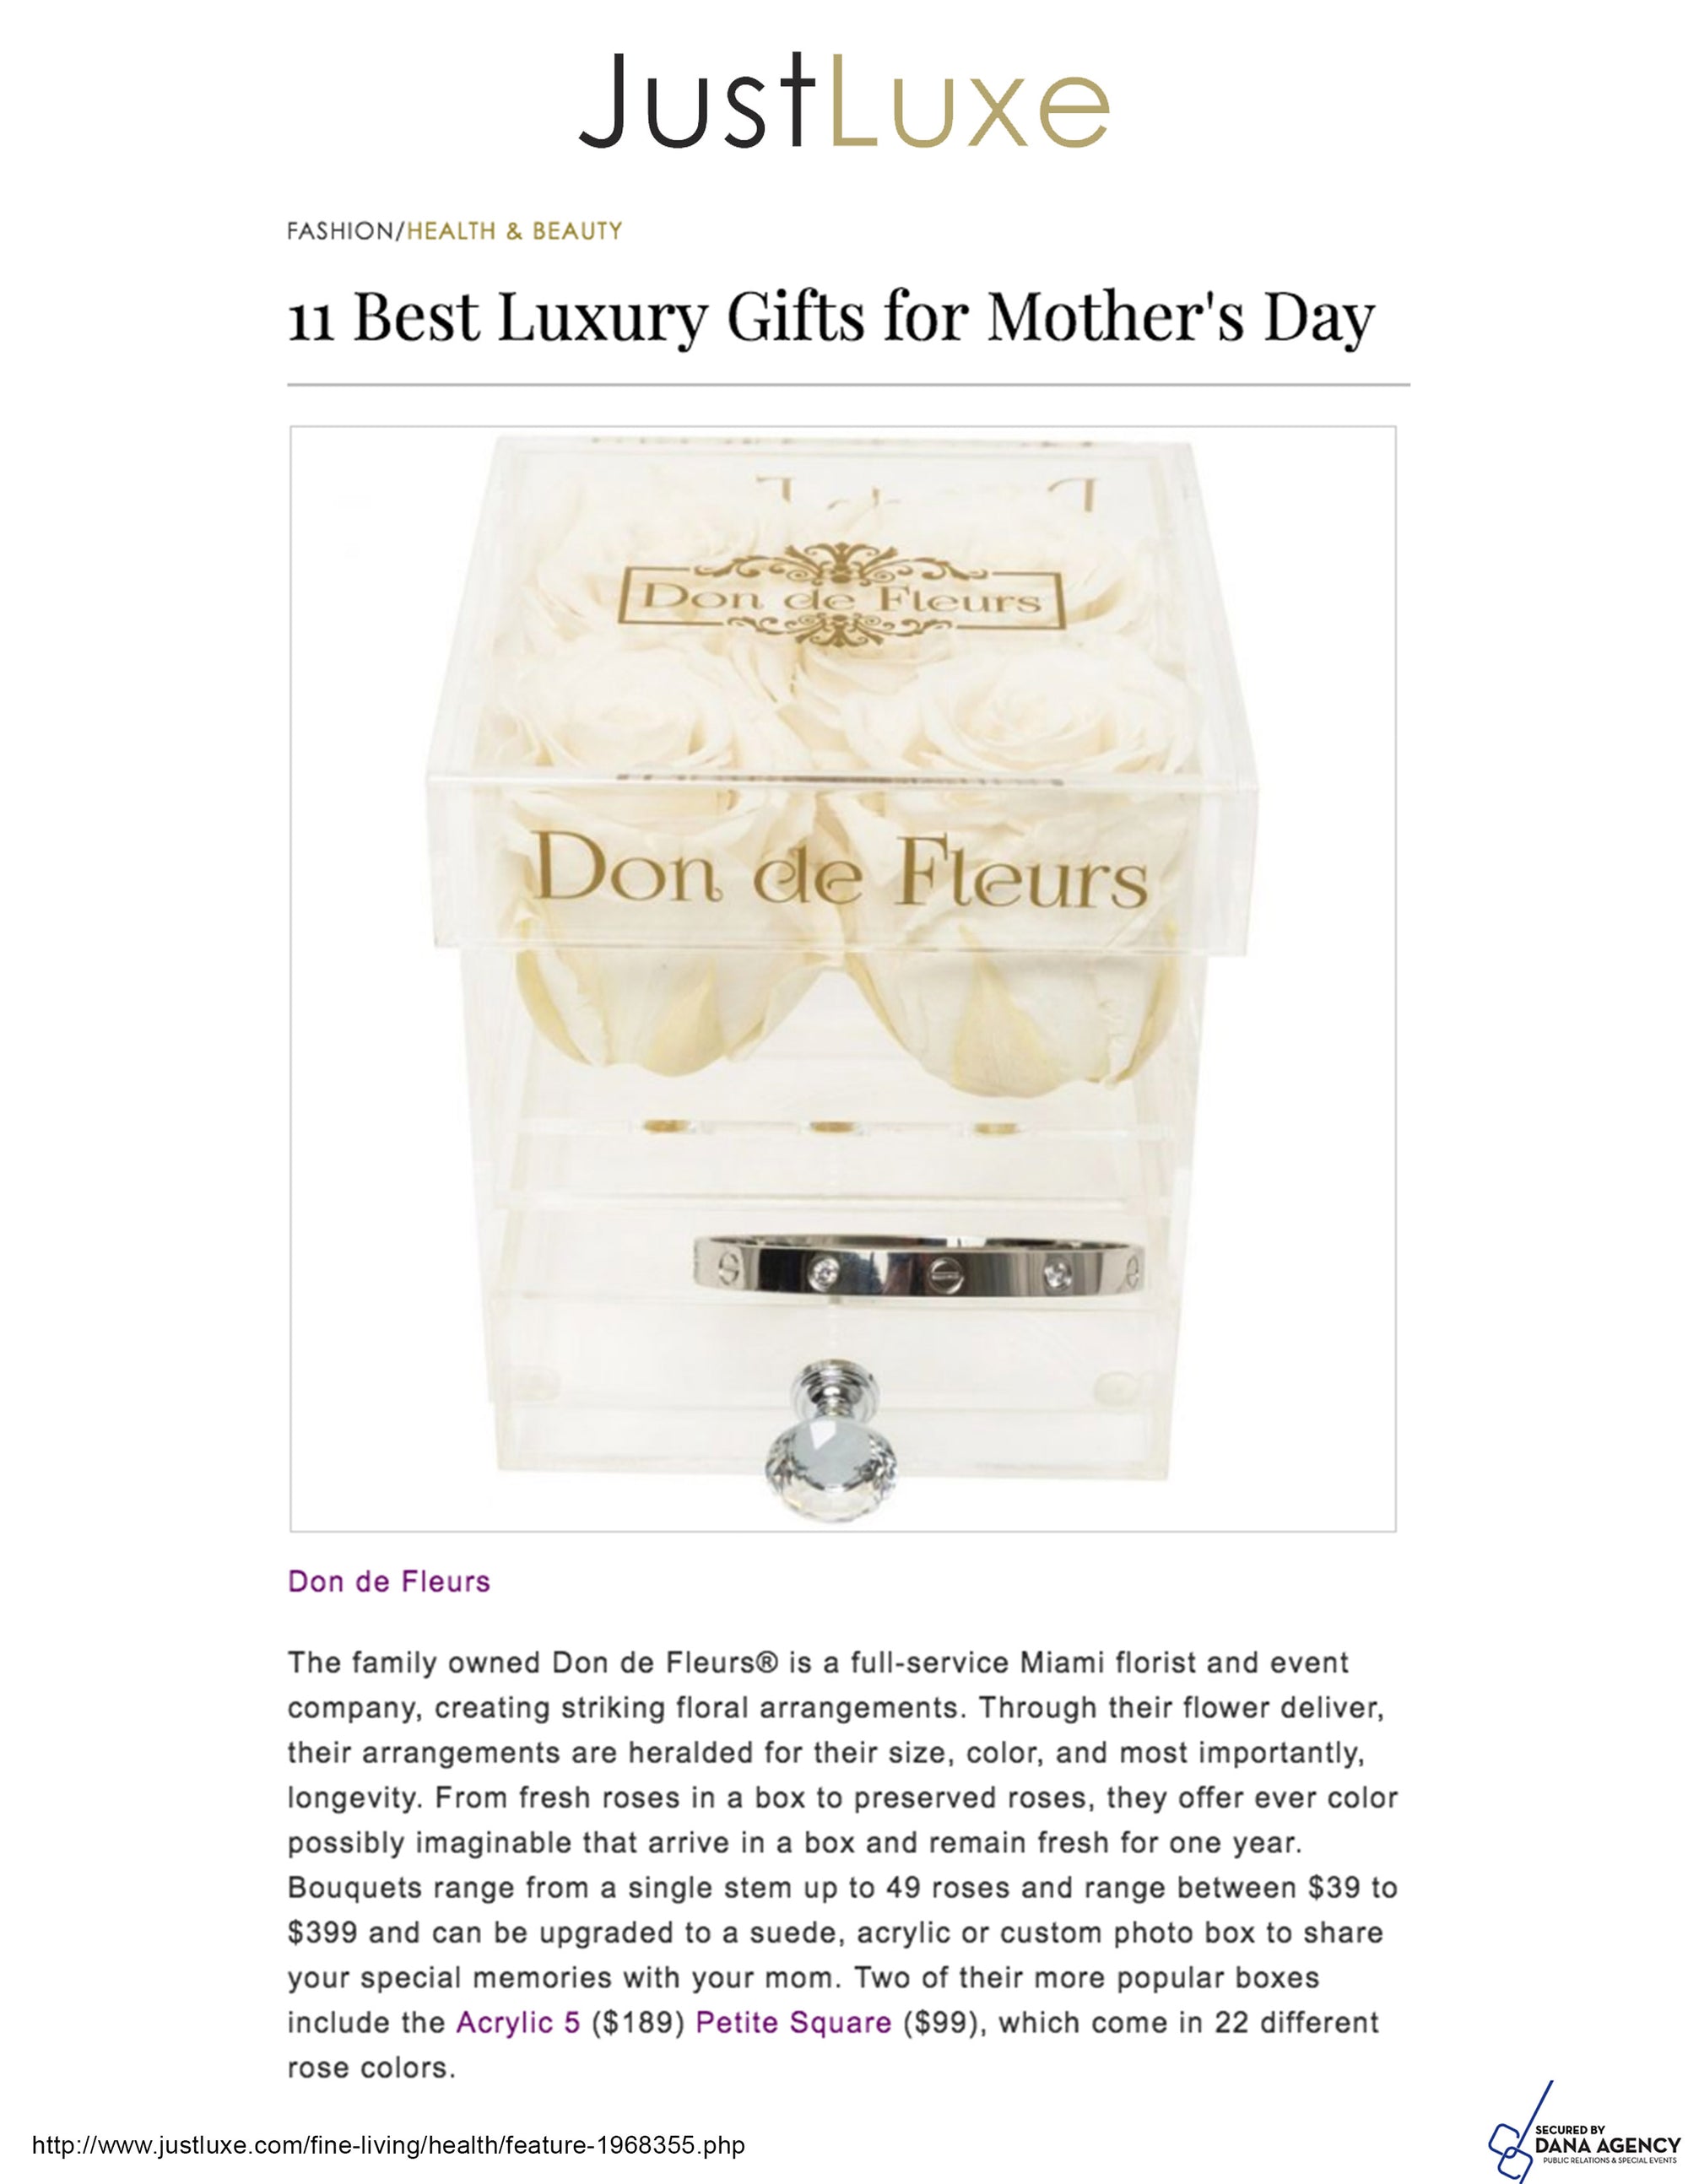 11 Best Luxury Gifts For Mother's Day